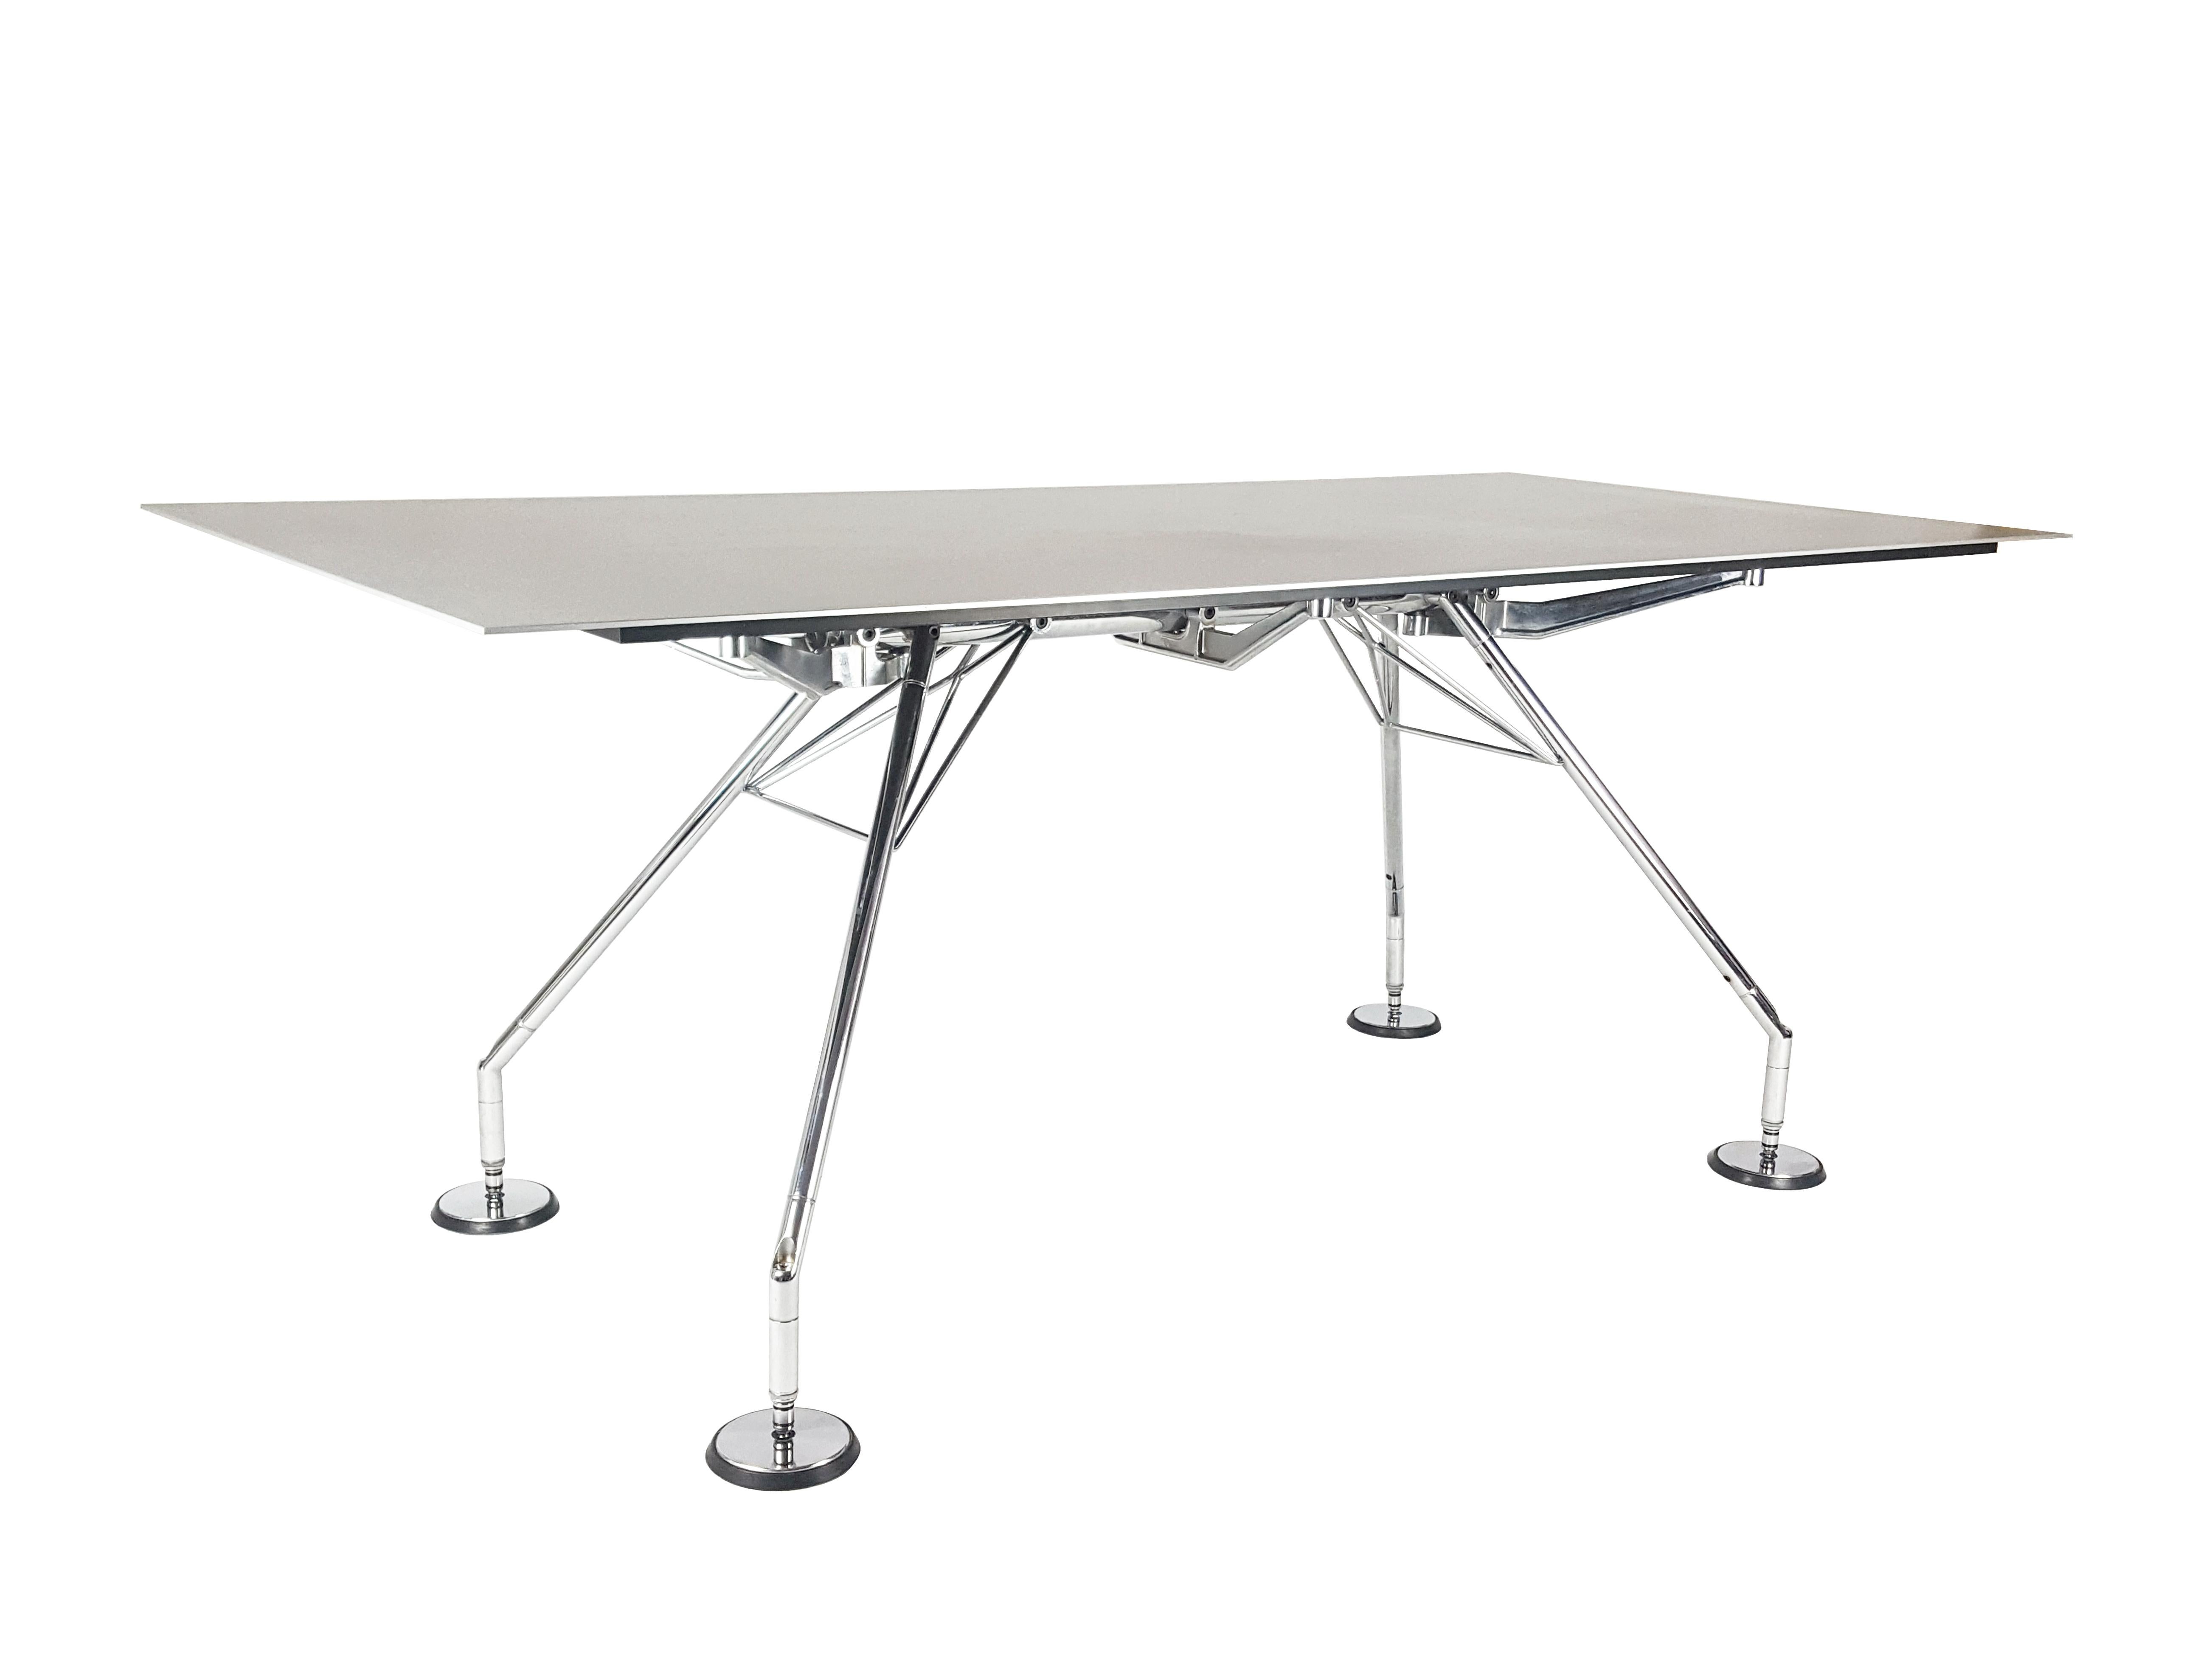 This nomos table or desk was designed by Norman Foster in the 1980s. This version belongs to a later production, (1990-2000). Rare version with a silver aluminum tabletop (rough finish skin). Legs are made from chrome-plated metal with black